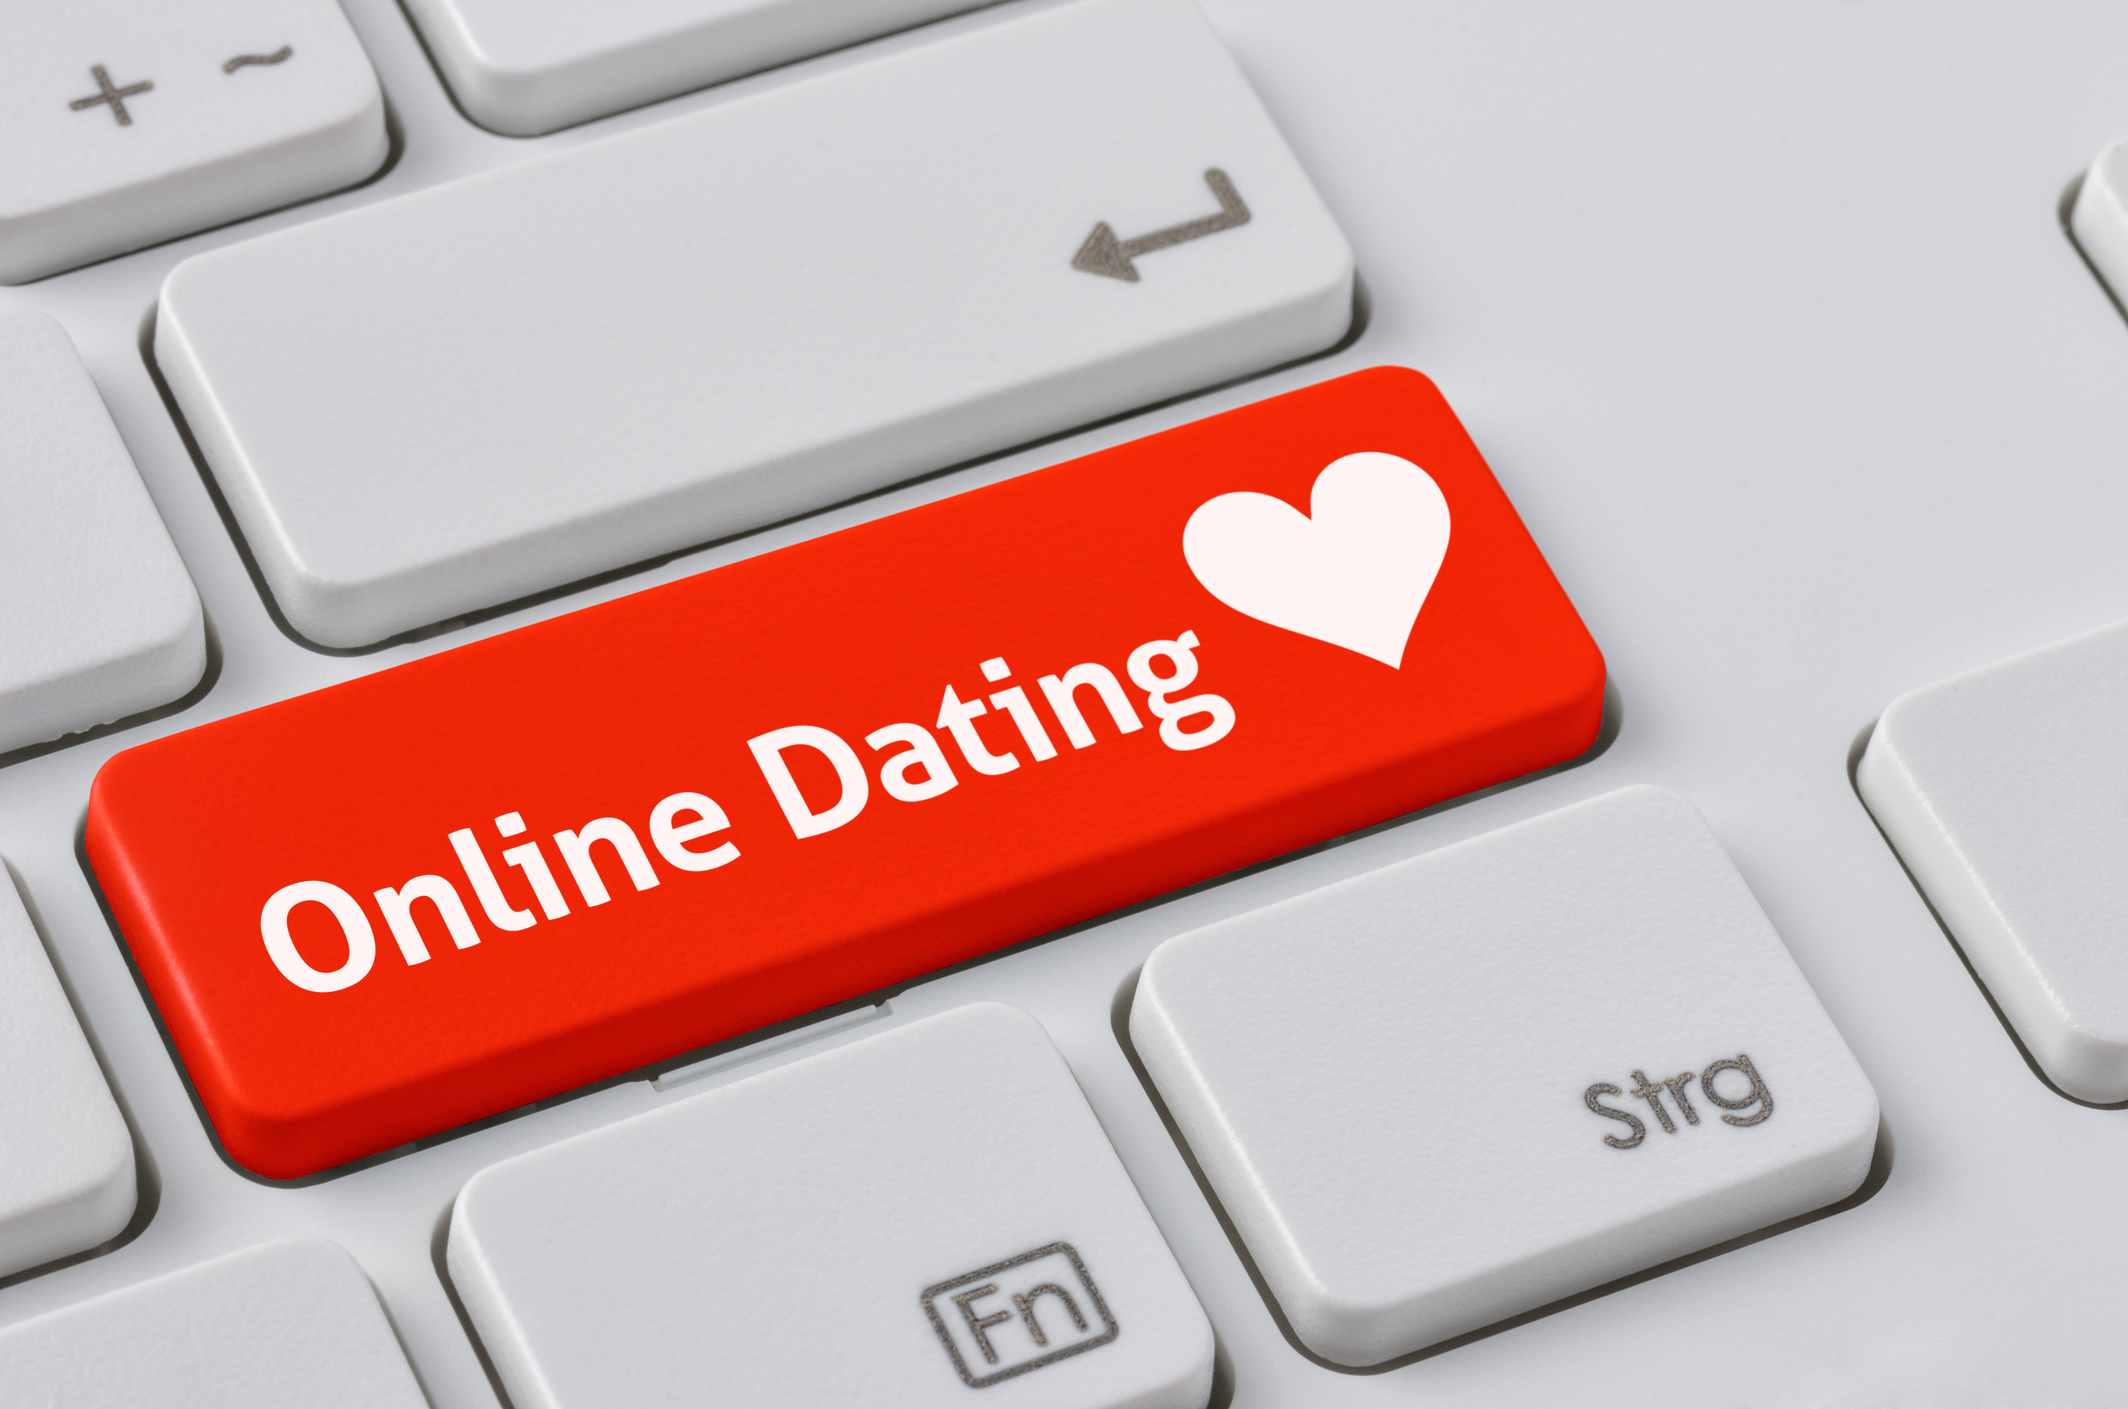 Tag dating site online